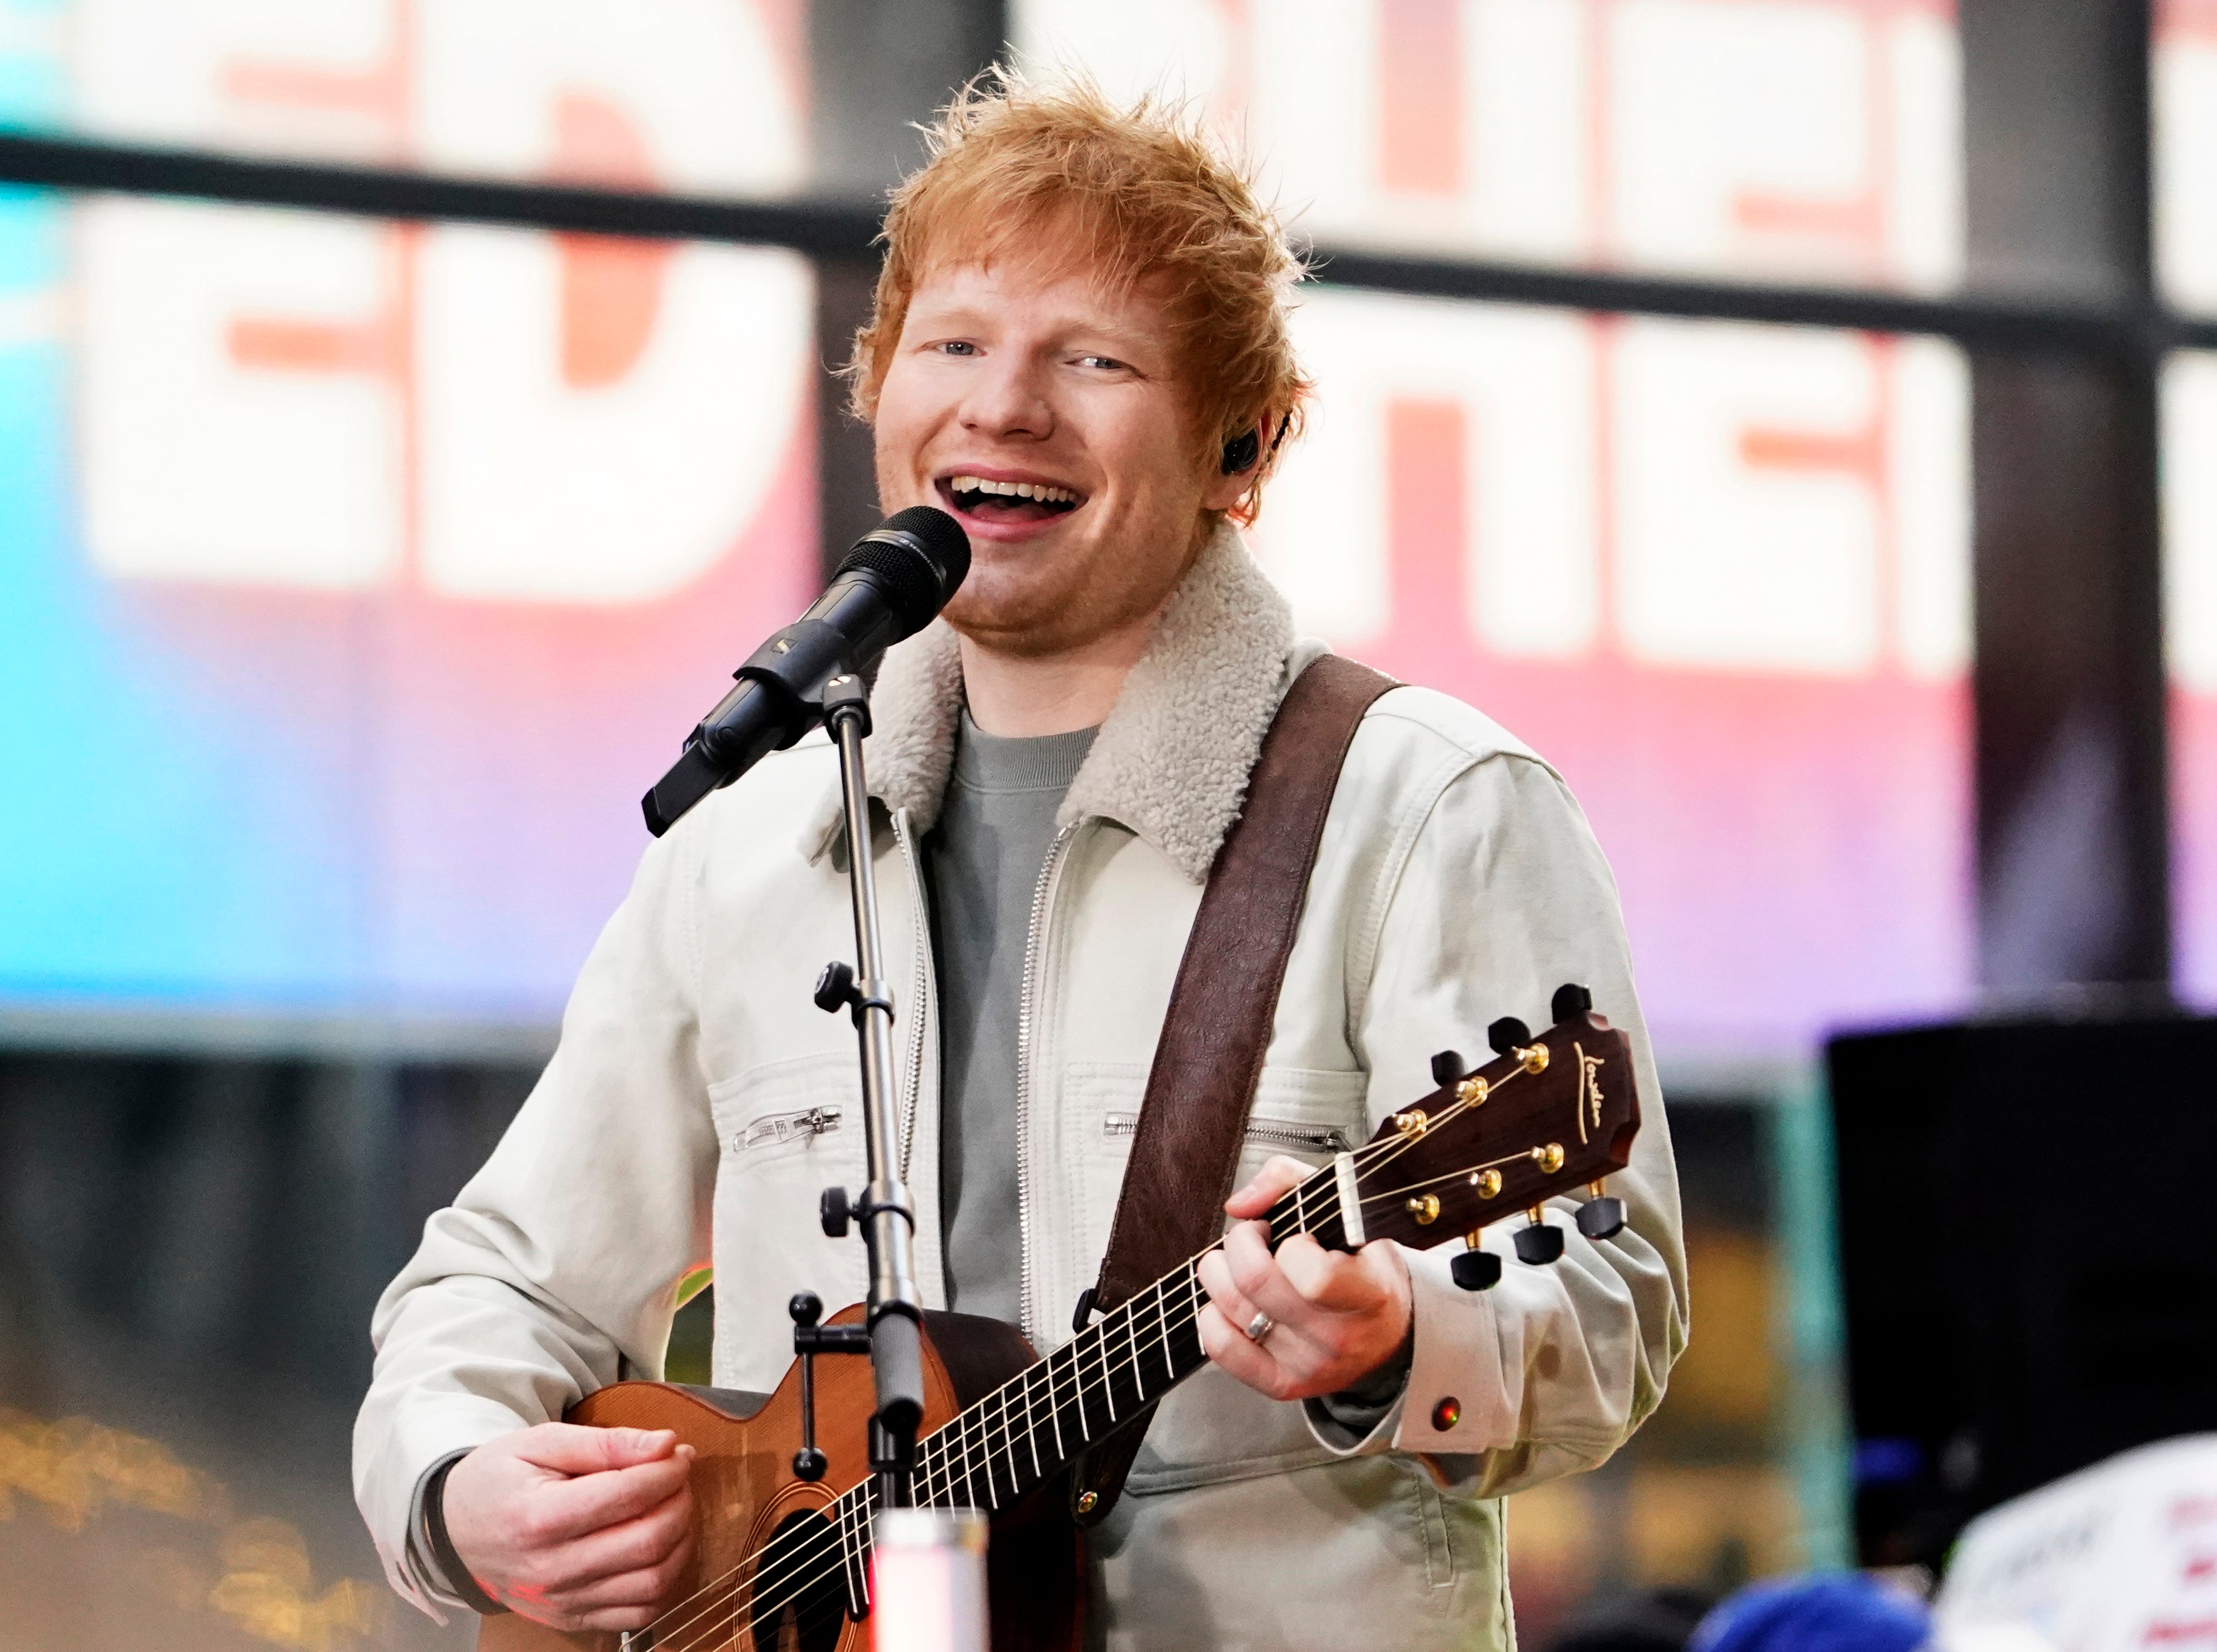 Ed Sheeran is making an appearance at the Platinum Jubilee